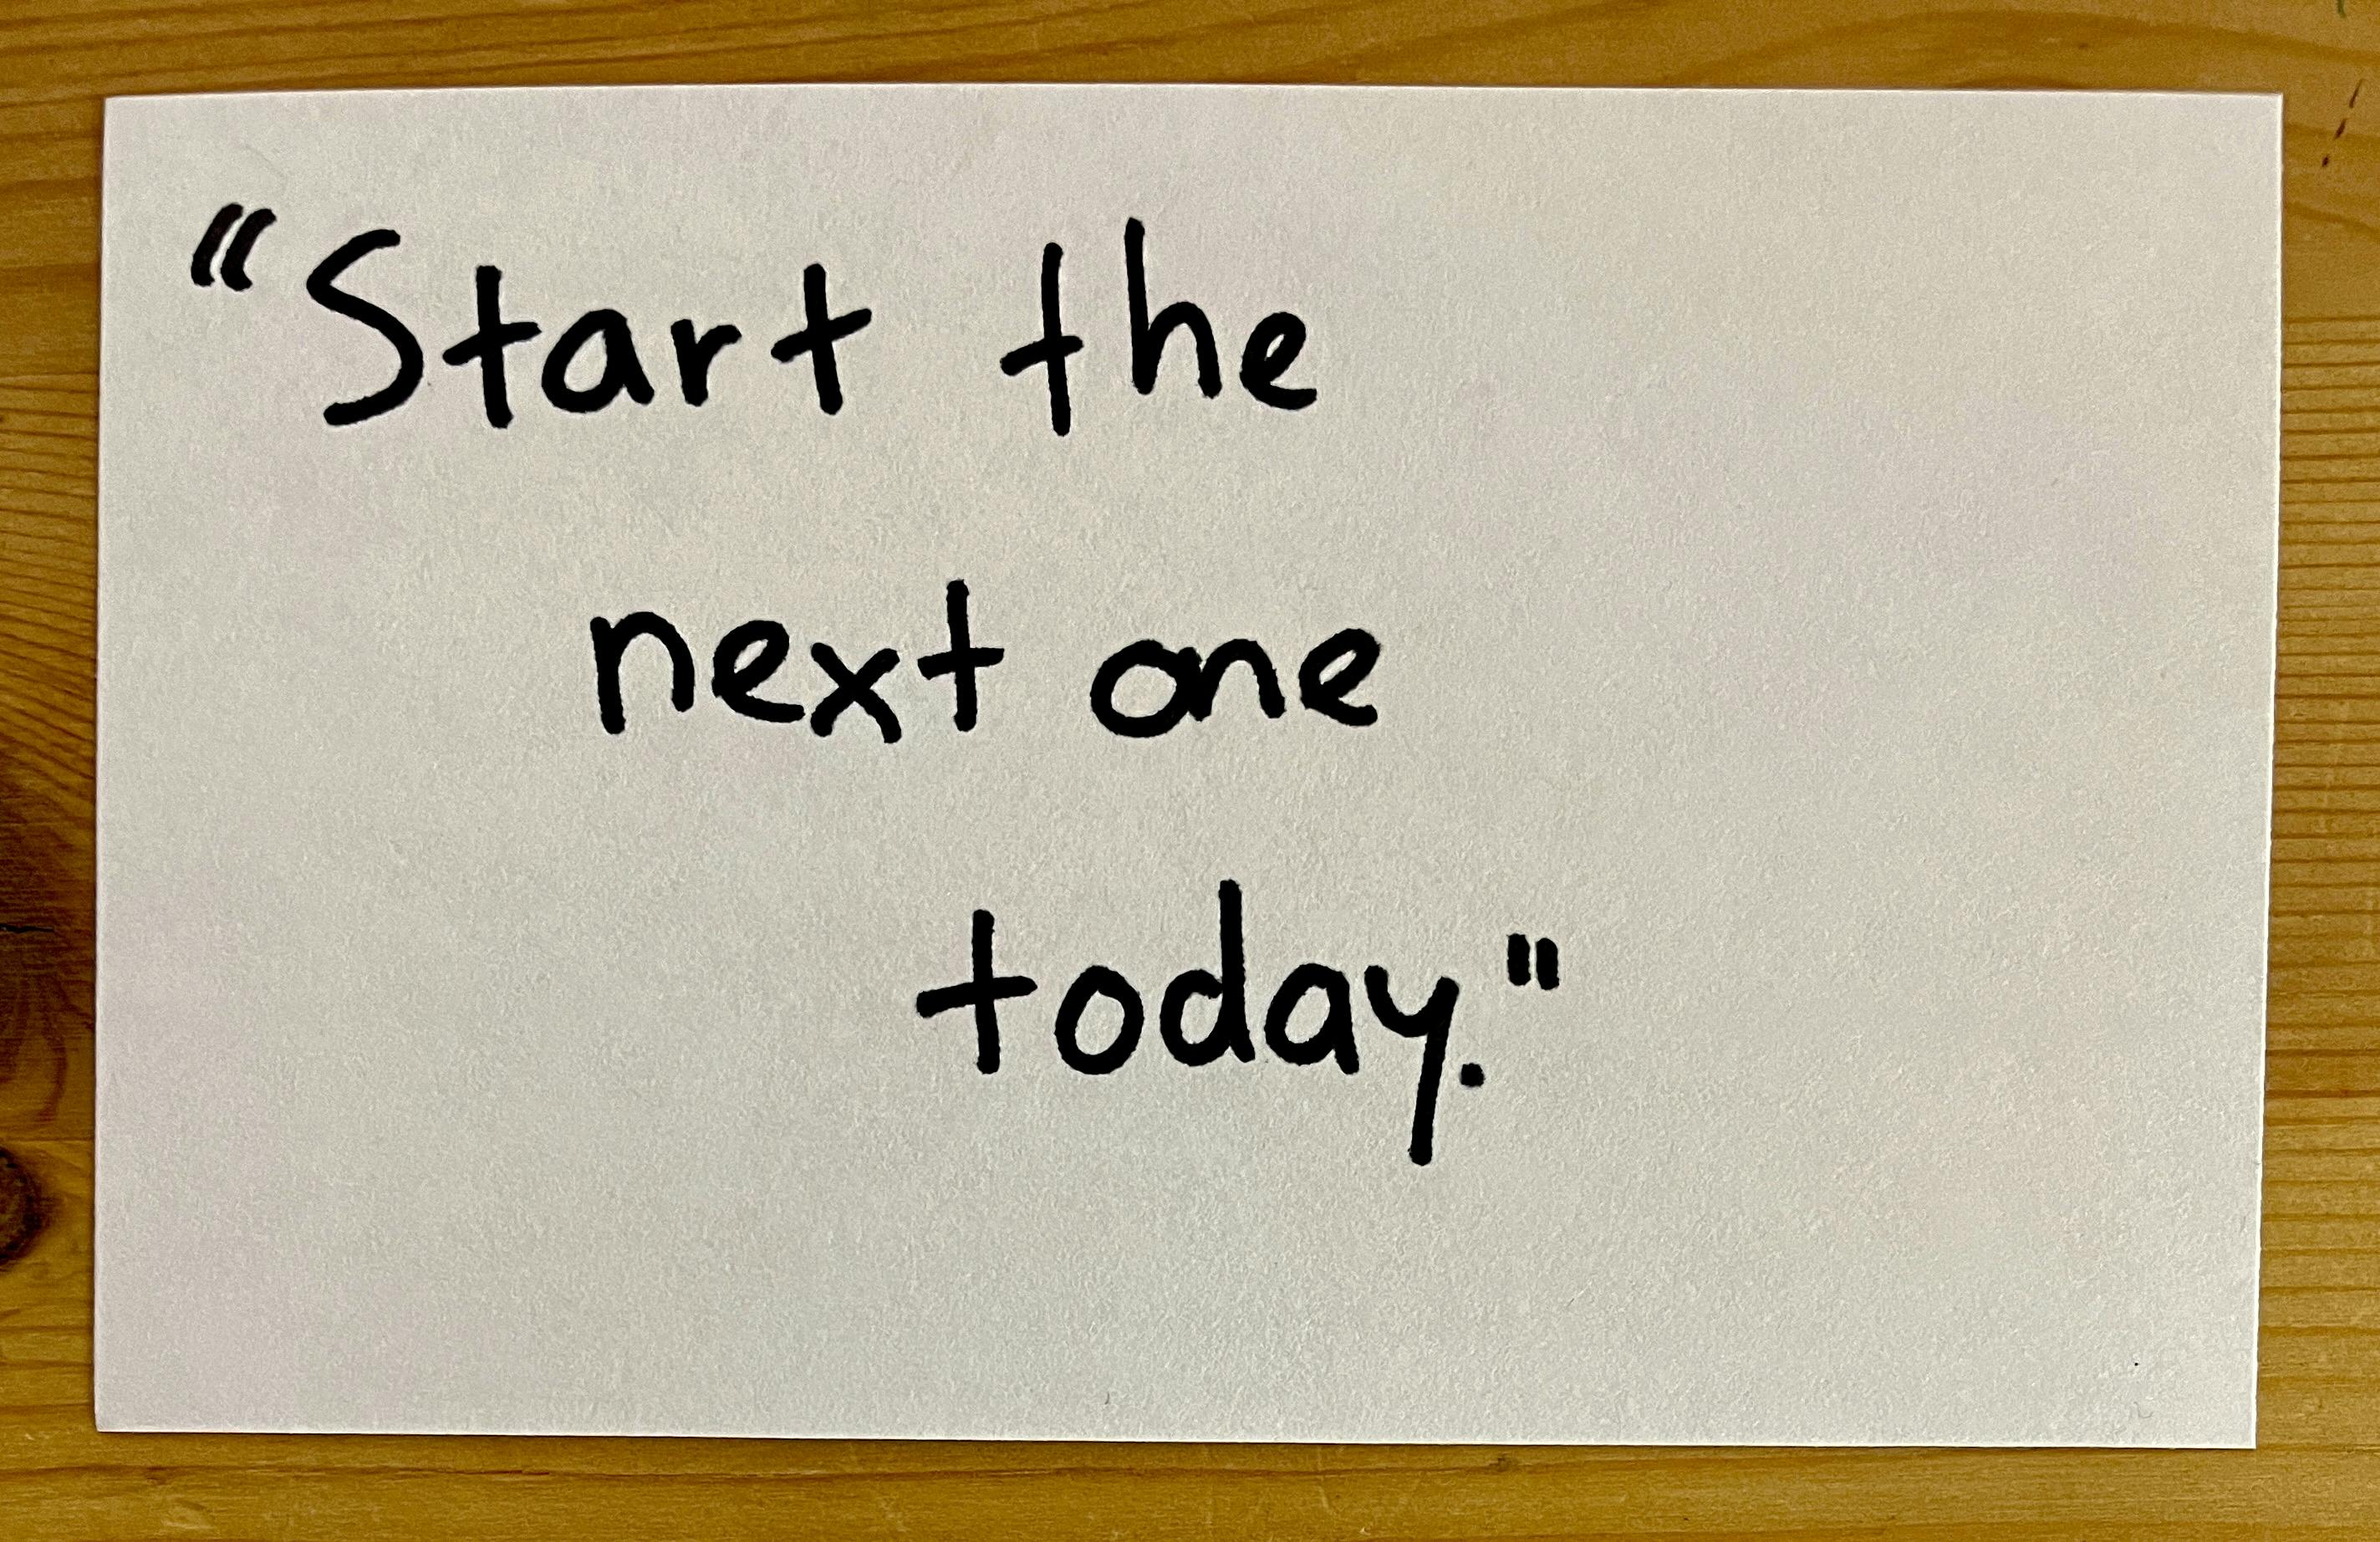 "Start the next one today."